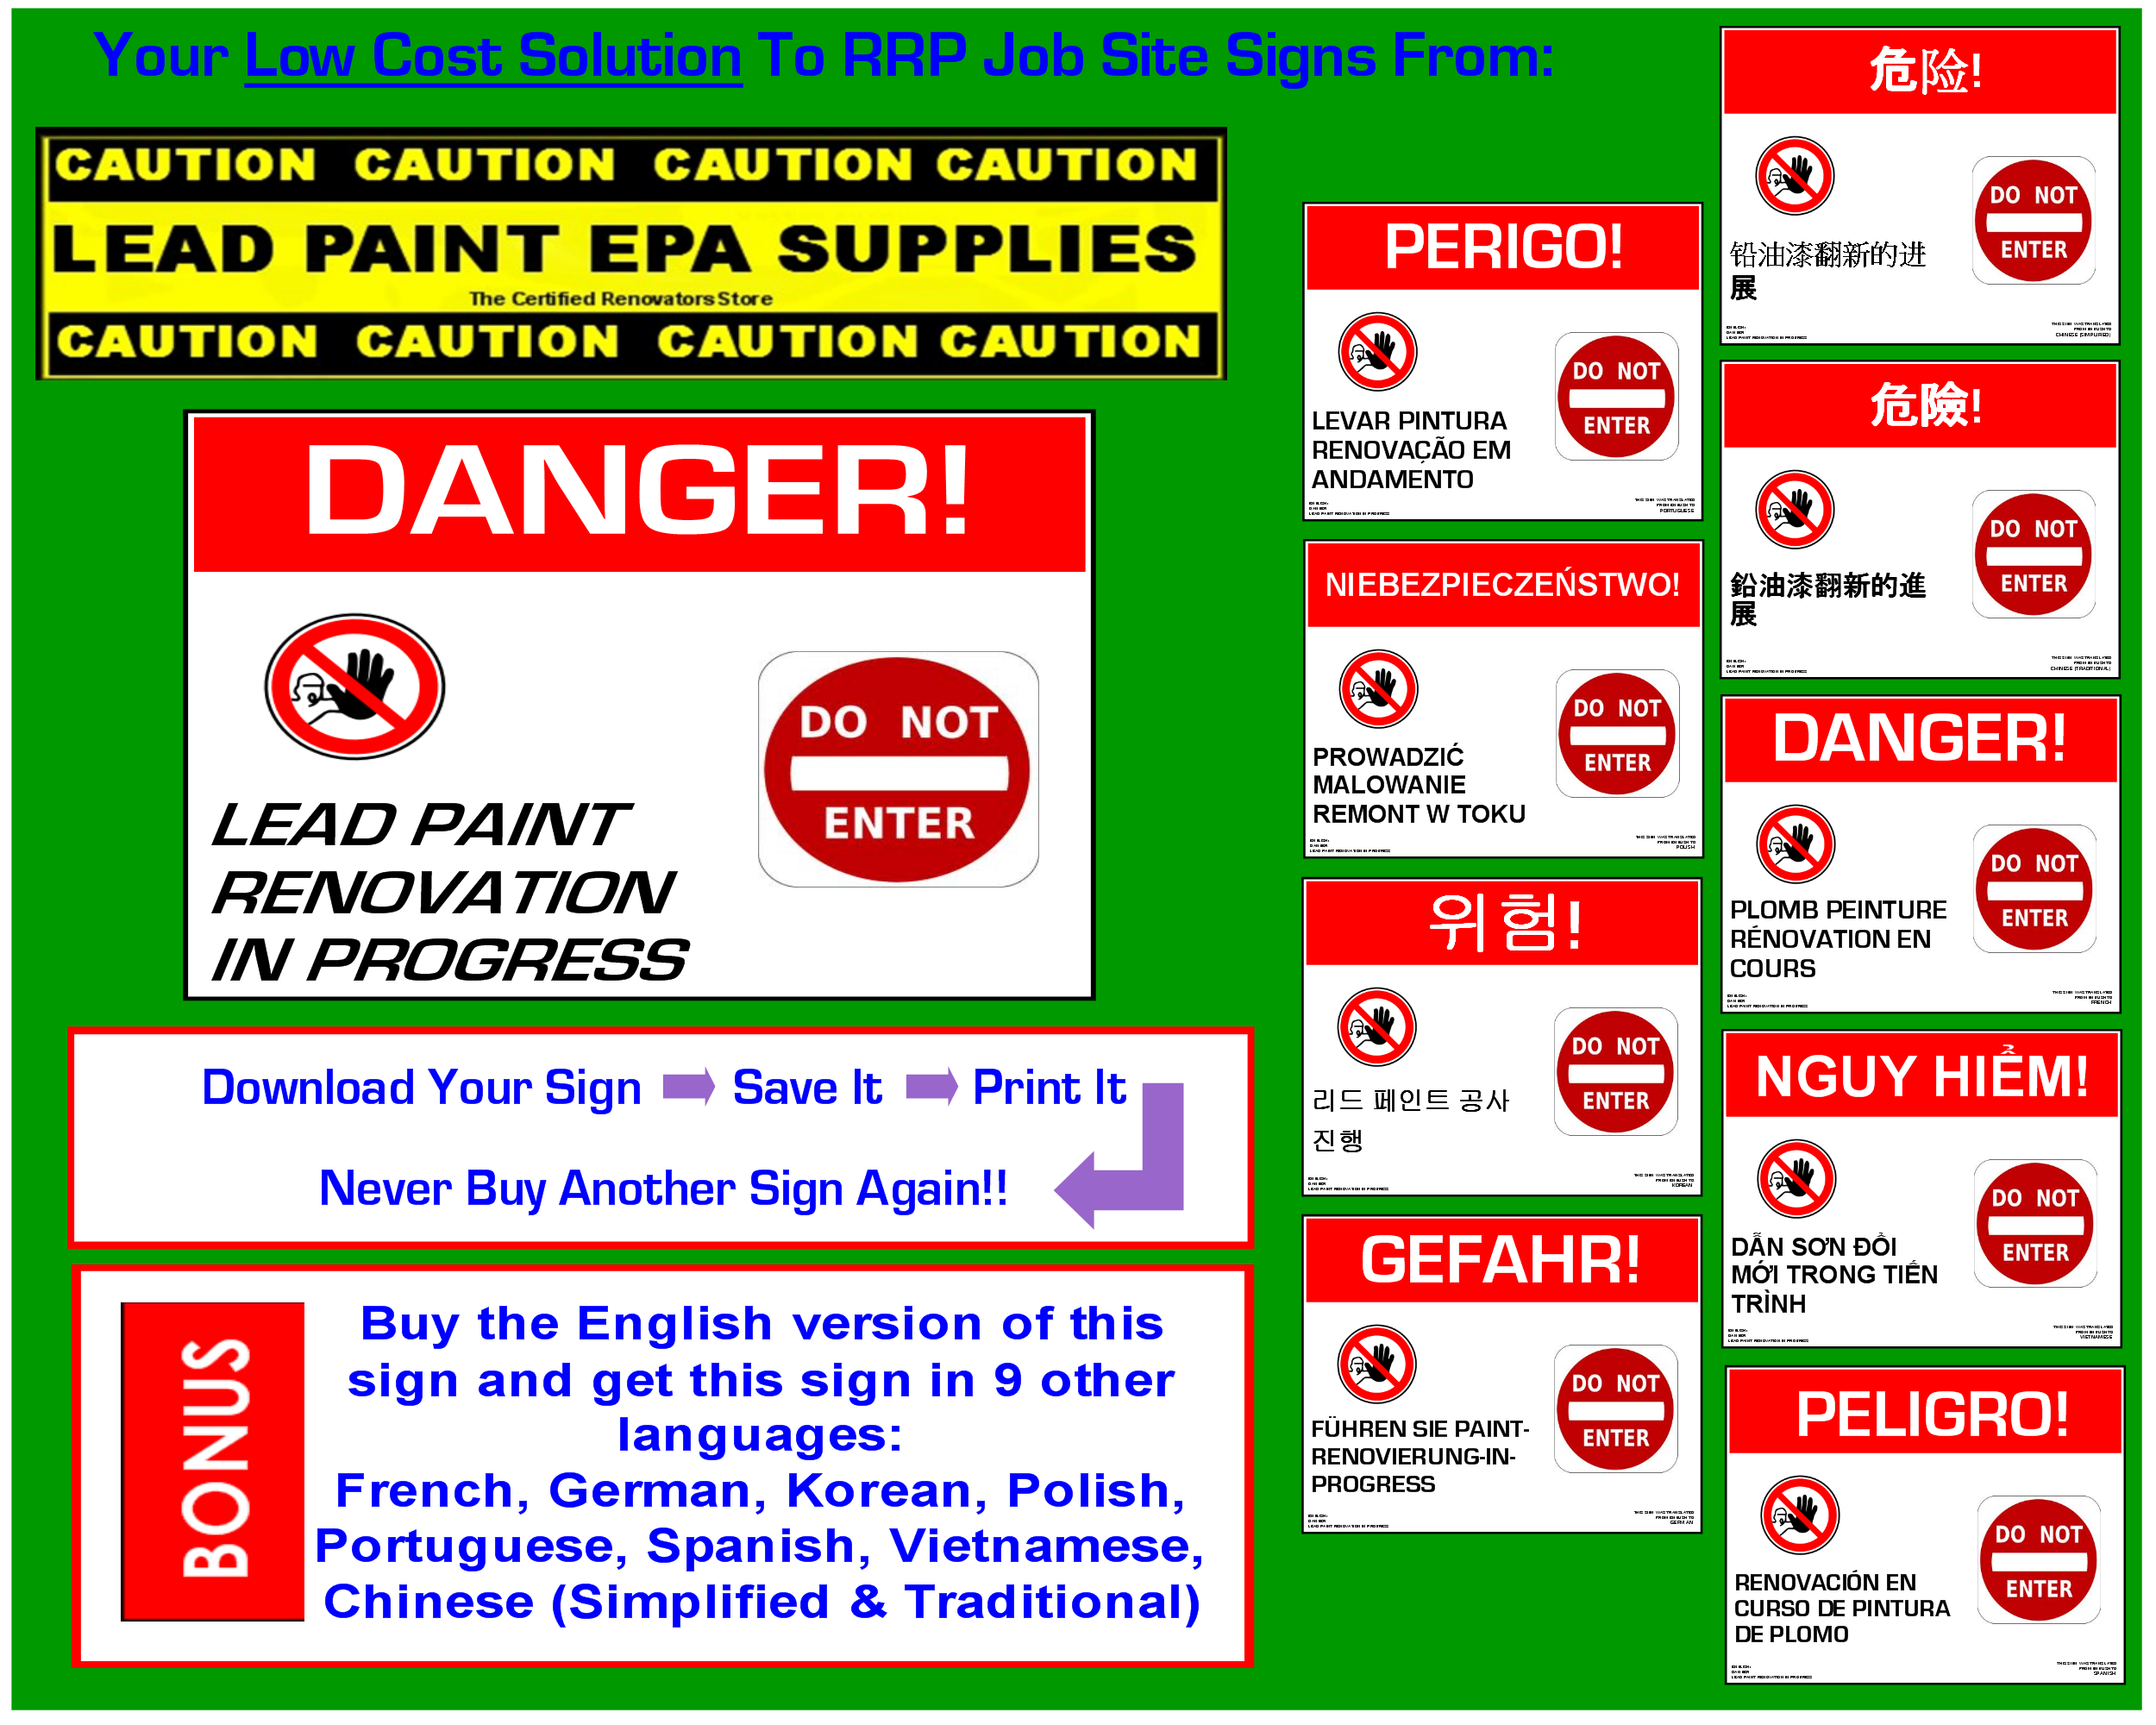 lead-paint-renovation-do-not-enter-banner-grouped-.png